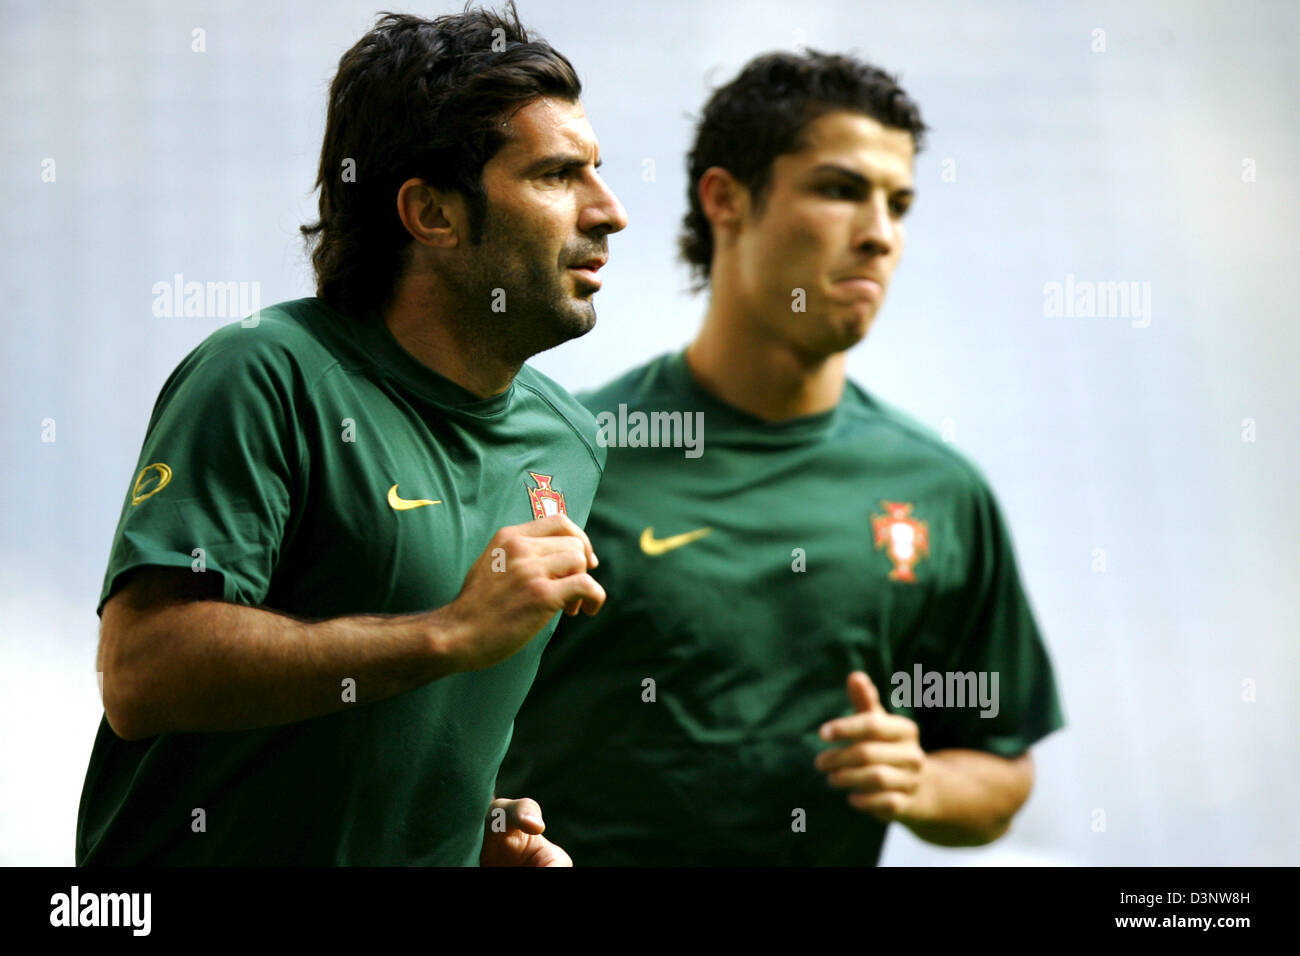 Portugal's Luis Figo (L) and Cristiano Ronaldo shown during a training session at the FIFA World Cup Stadium in Munich, Germany, Tuesday, 4 July 2006. Portugal will play against France in the semi final of the FIFA World Cup on Wednesday in Munich. Photo: MATTHIAS SCHRADER +++ Mobile Services OUT +++ Please refer to FIFA's Terms and Conditions. Stock Photo